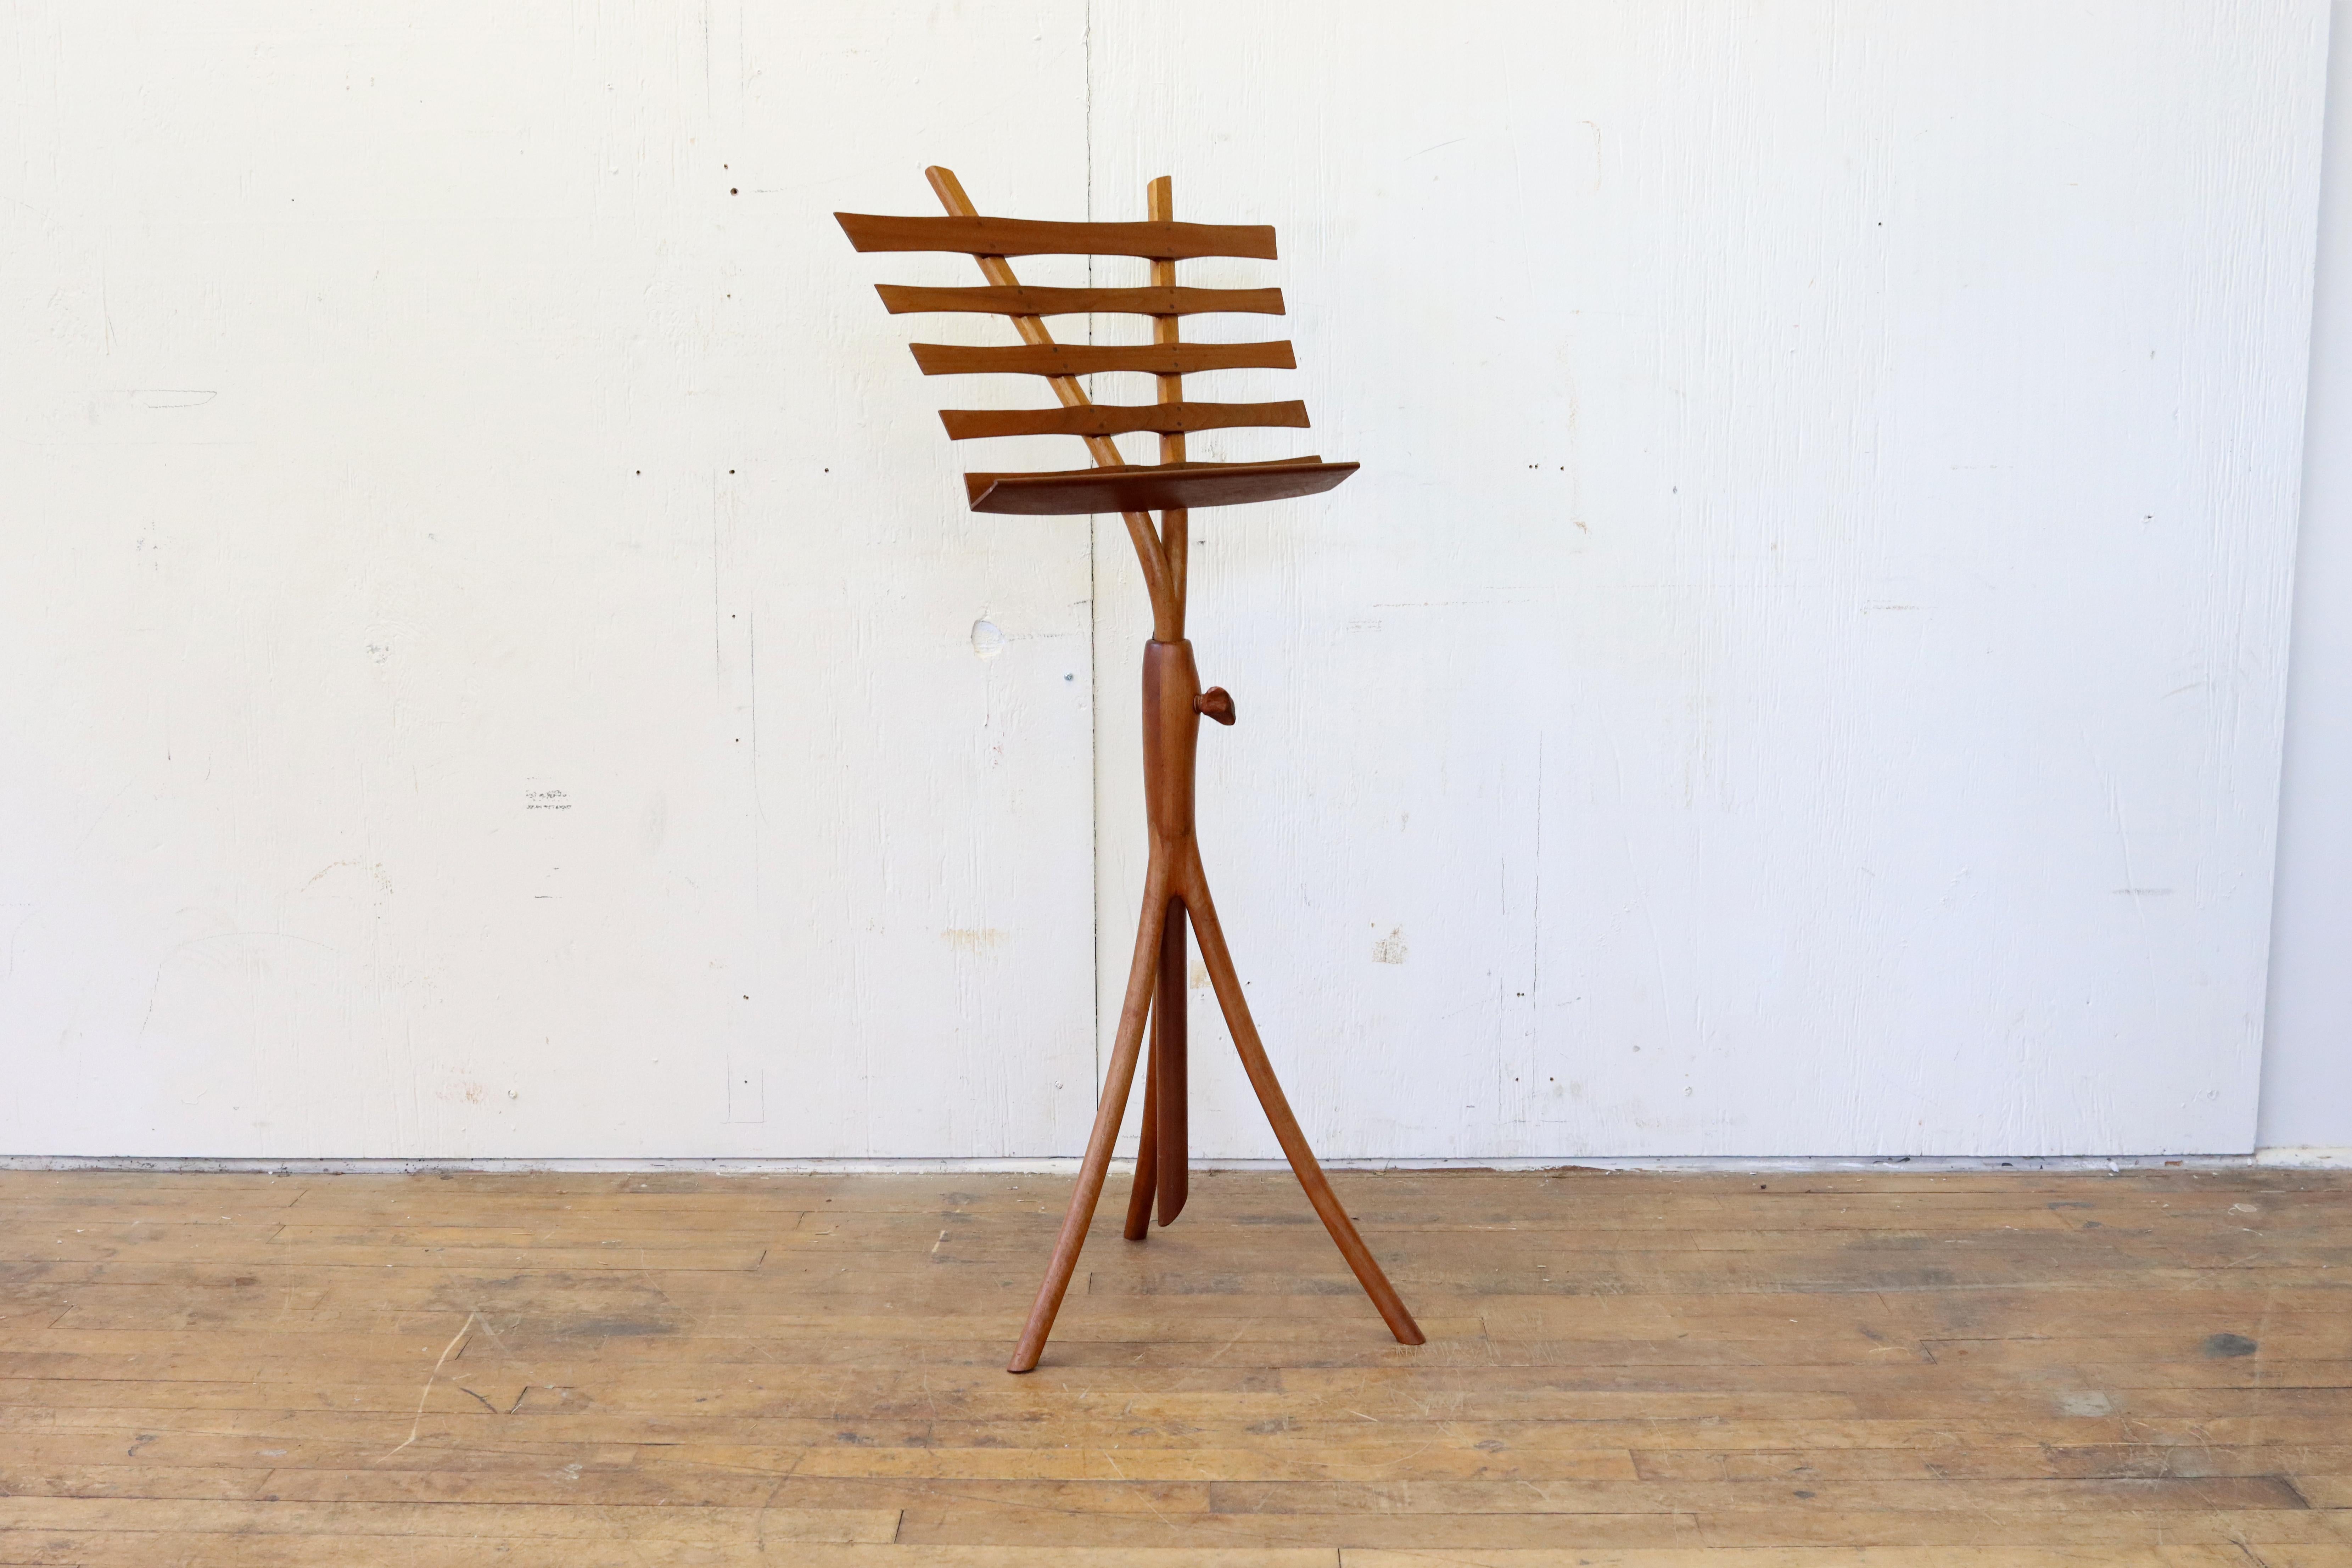 A stunning vintage studio woodworker music stand in the style of Wendell Castle or Wharton Esherick. This beautiful hand-crafted modernist stand has a curved tripod base supporting an adjustable height rack. The rack is constructed of a two-pronged